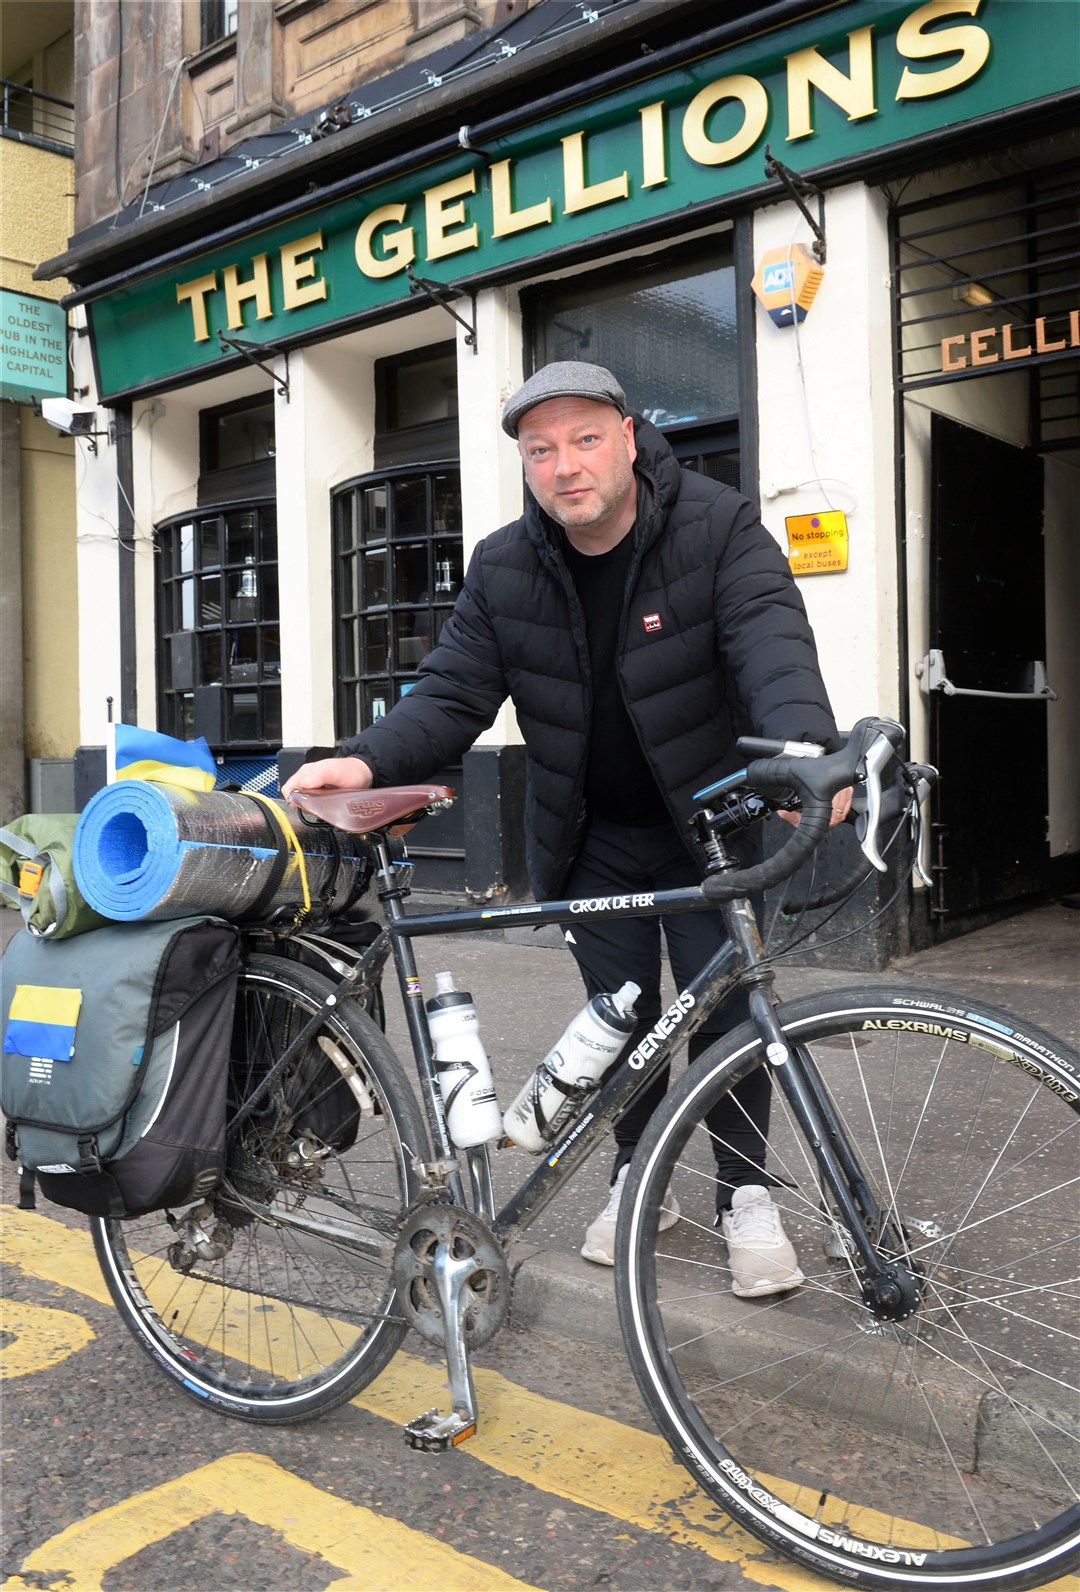 Alasdair Fraser before setting off for Gdansk to The Gellions fundraising cycle ride for Urkraine. Picture: Gary Anthony